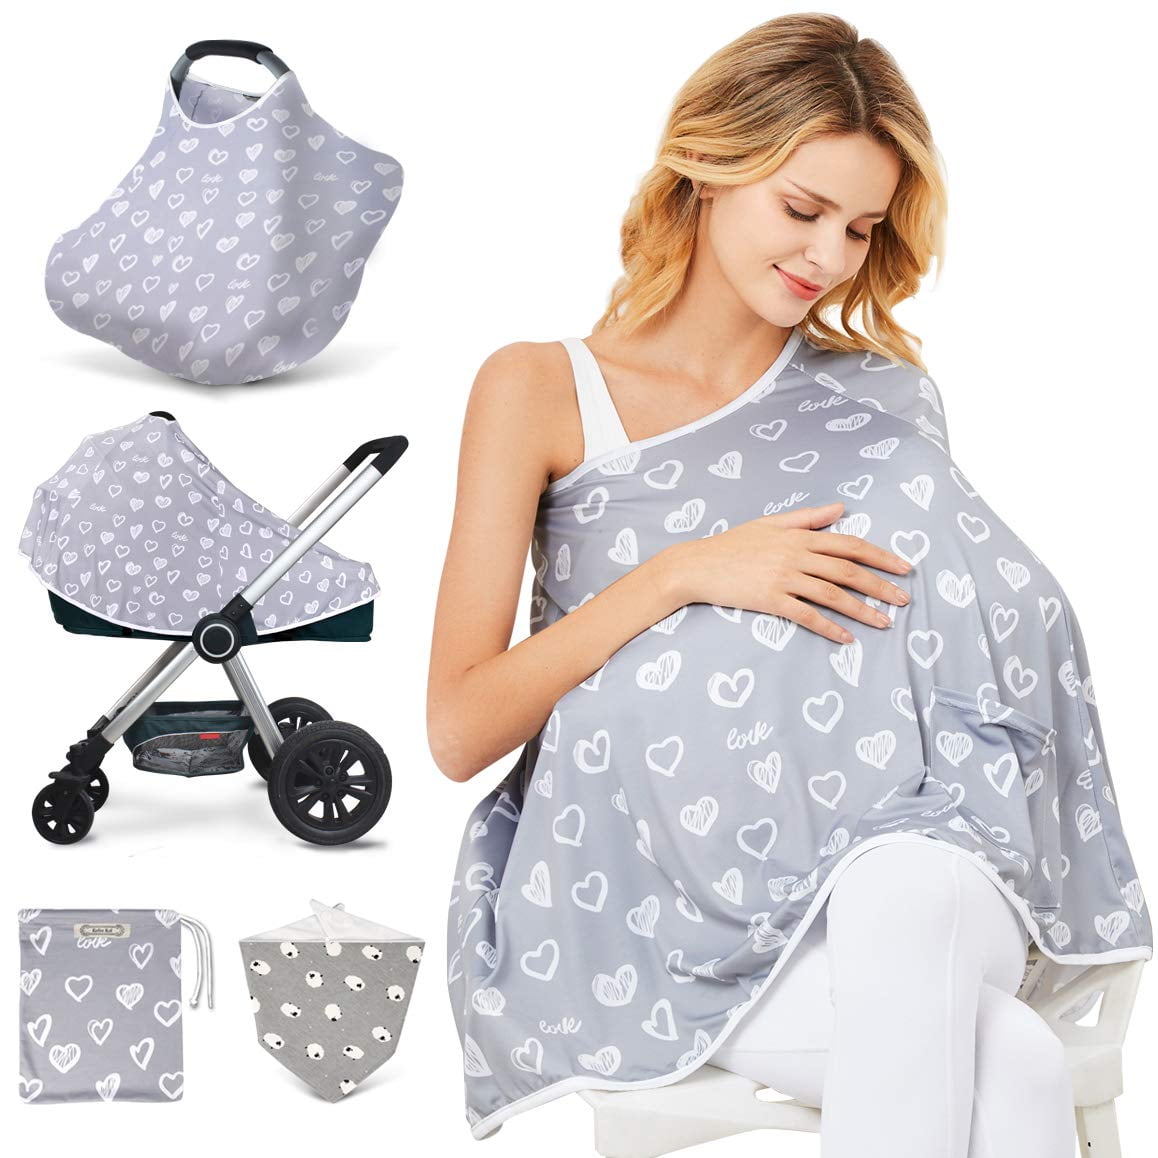 4 in 1 Multi-Use Cover for Nursing Baby Car Seat Stroller Scarf Shopping Cart 